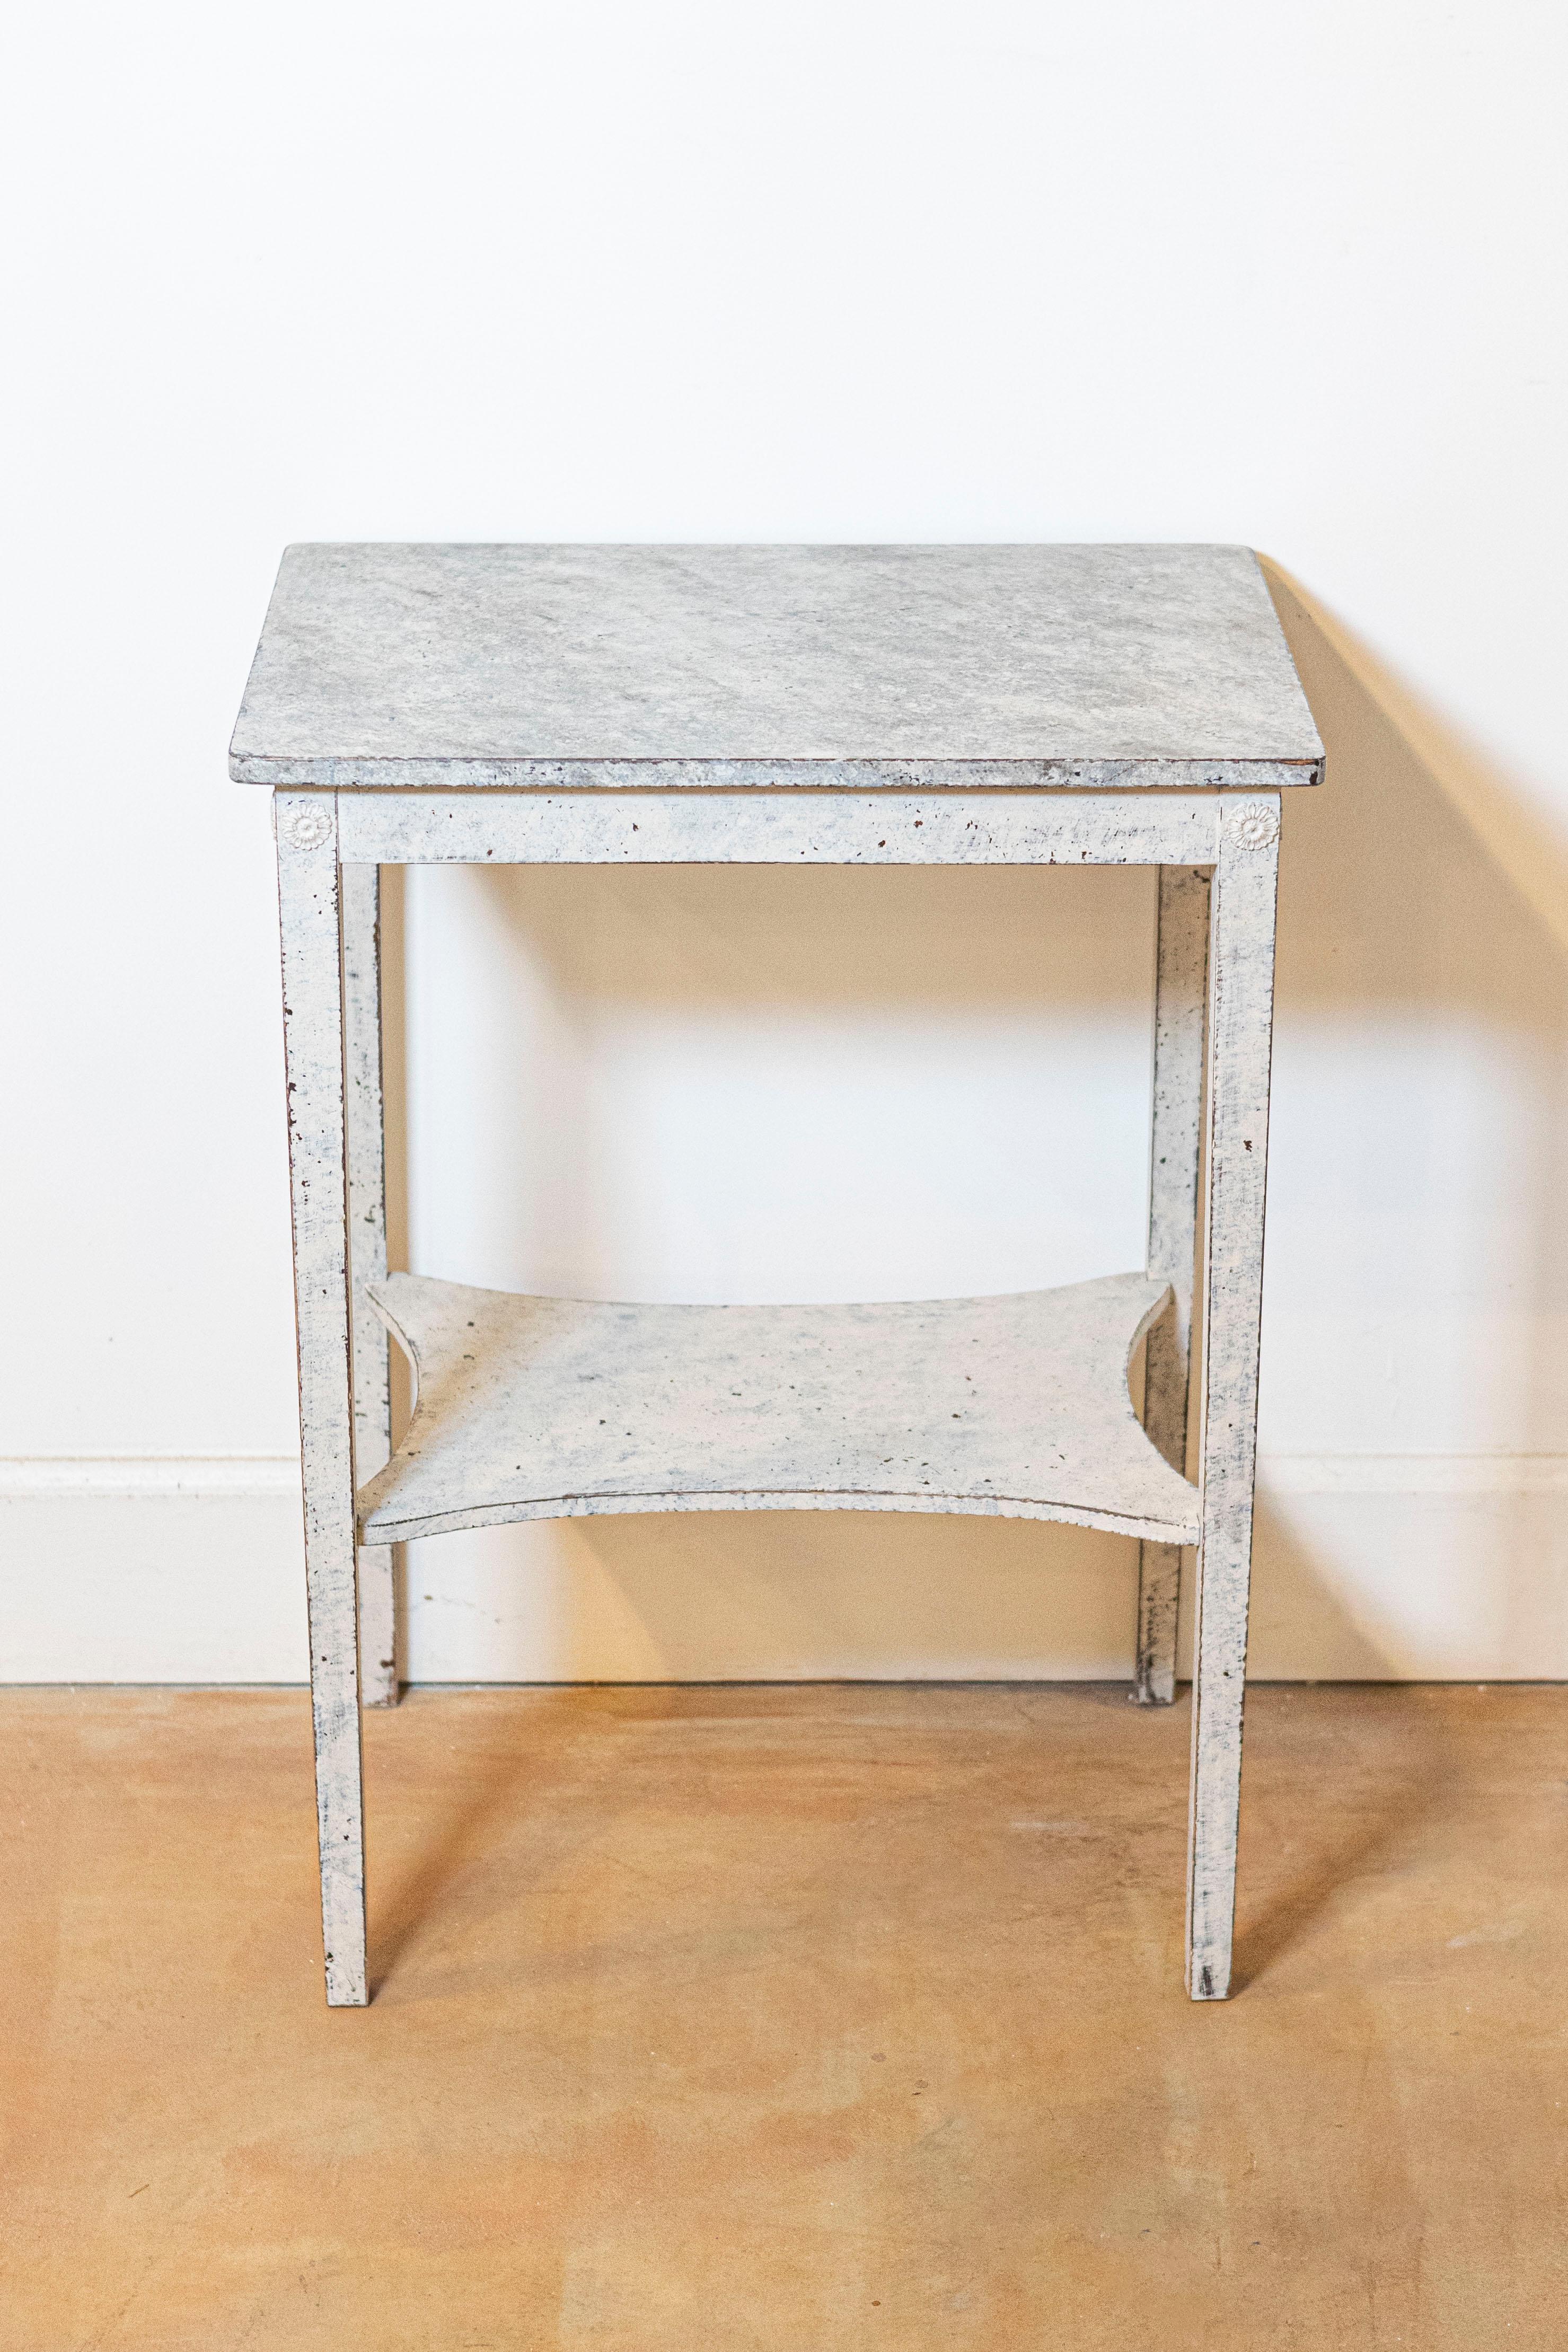 A Swedish painted side table from the 19th century, with marbleized top and in-curving low shelf. Created in Sweden during the 19th century, this painted side table features a rectangular faux marble top sitting above four straight legs adorned with